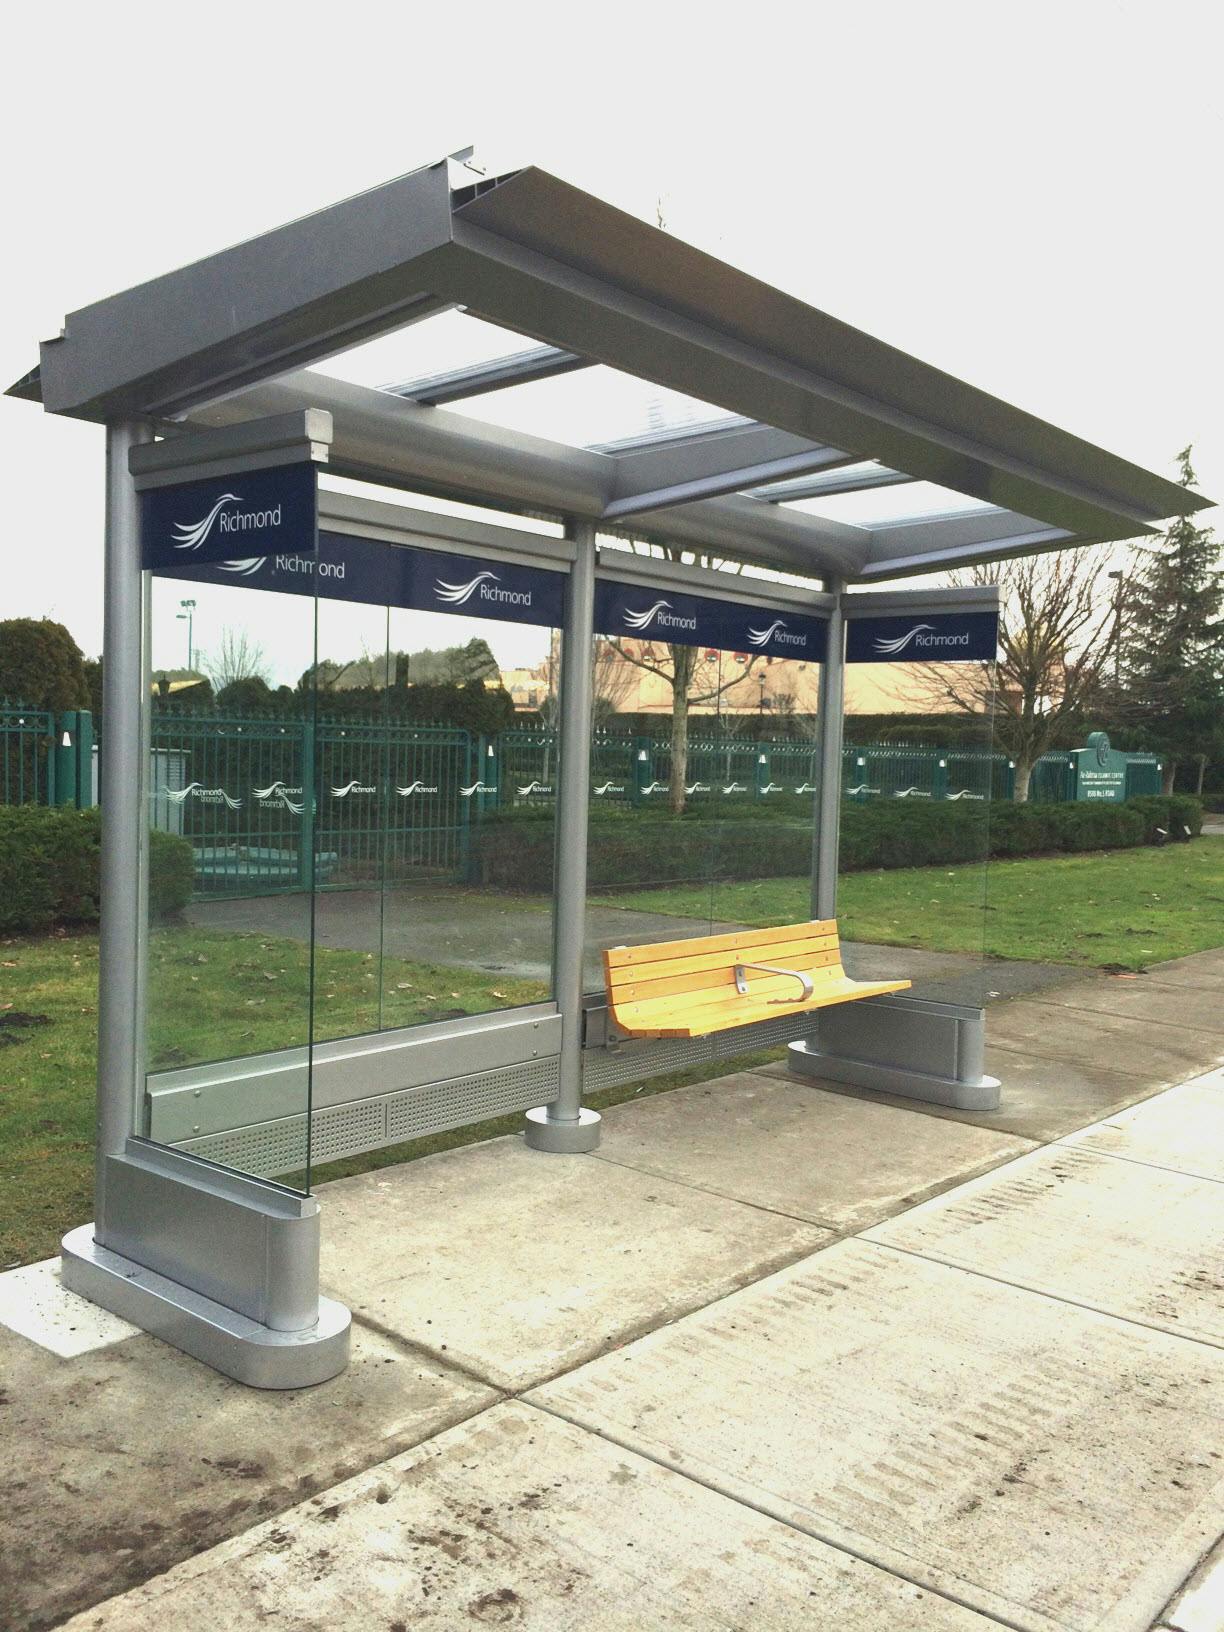 City-owned transit shelter